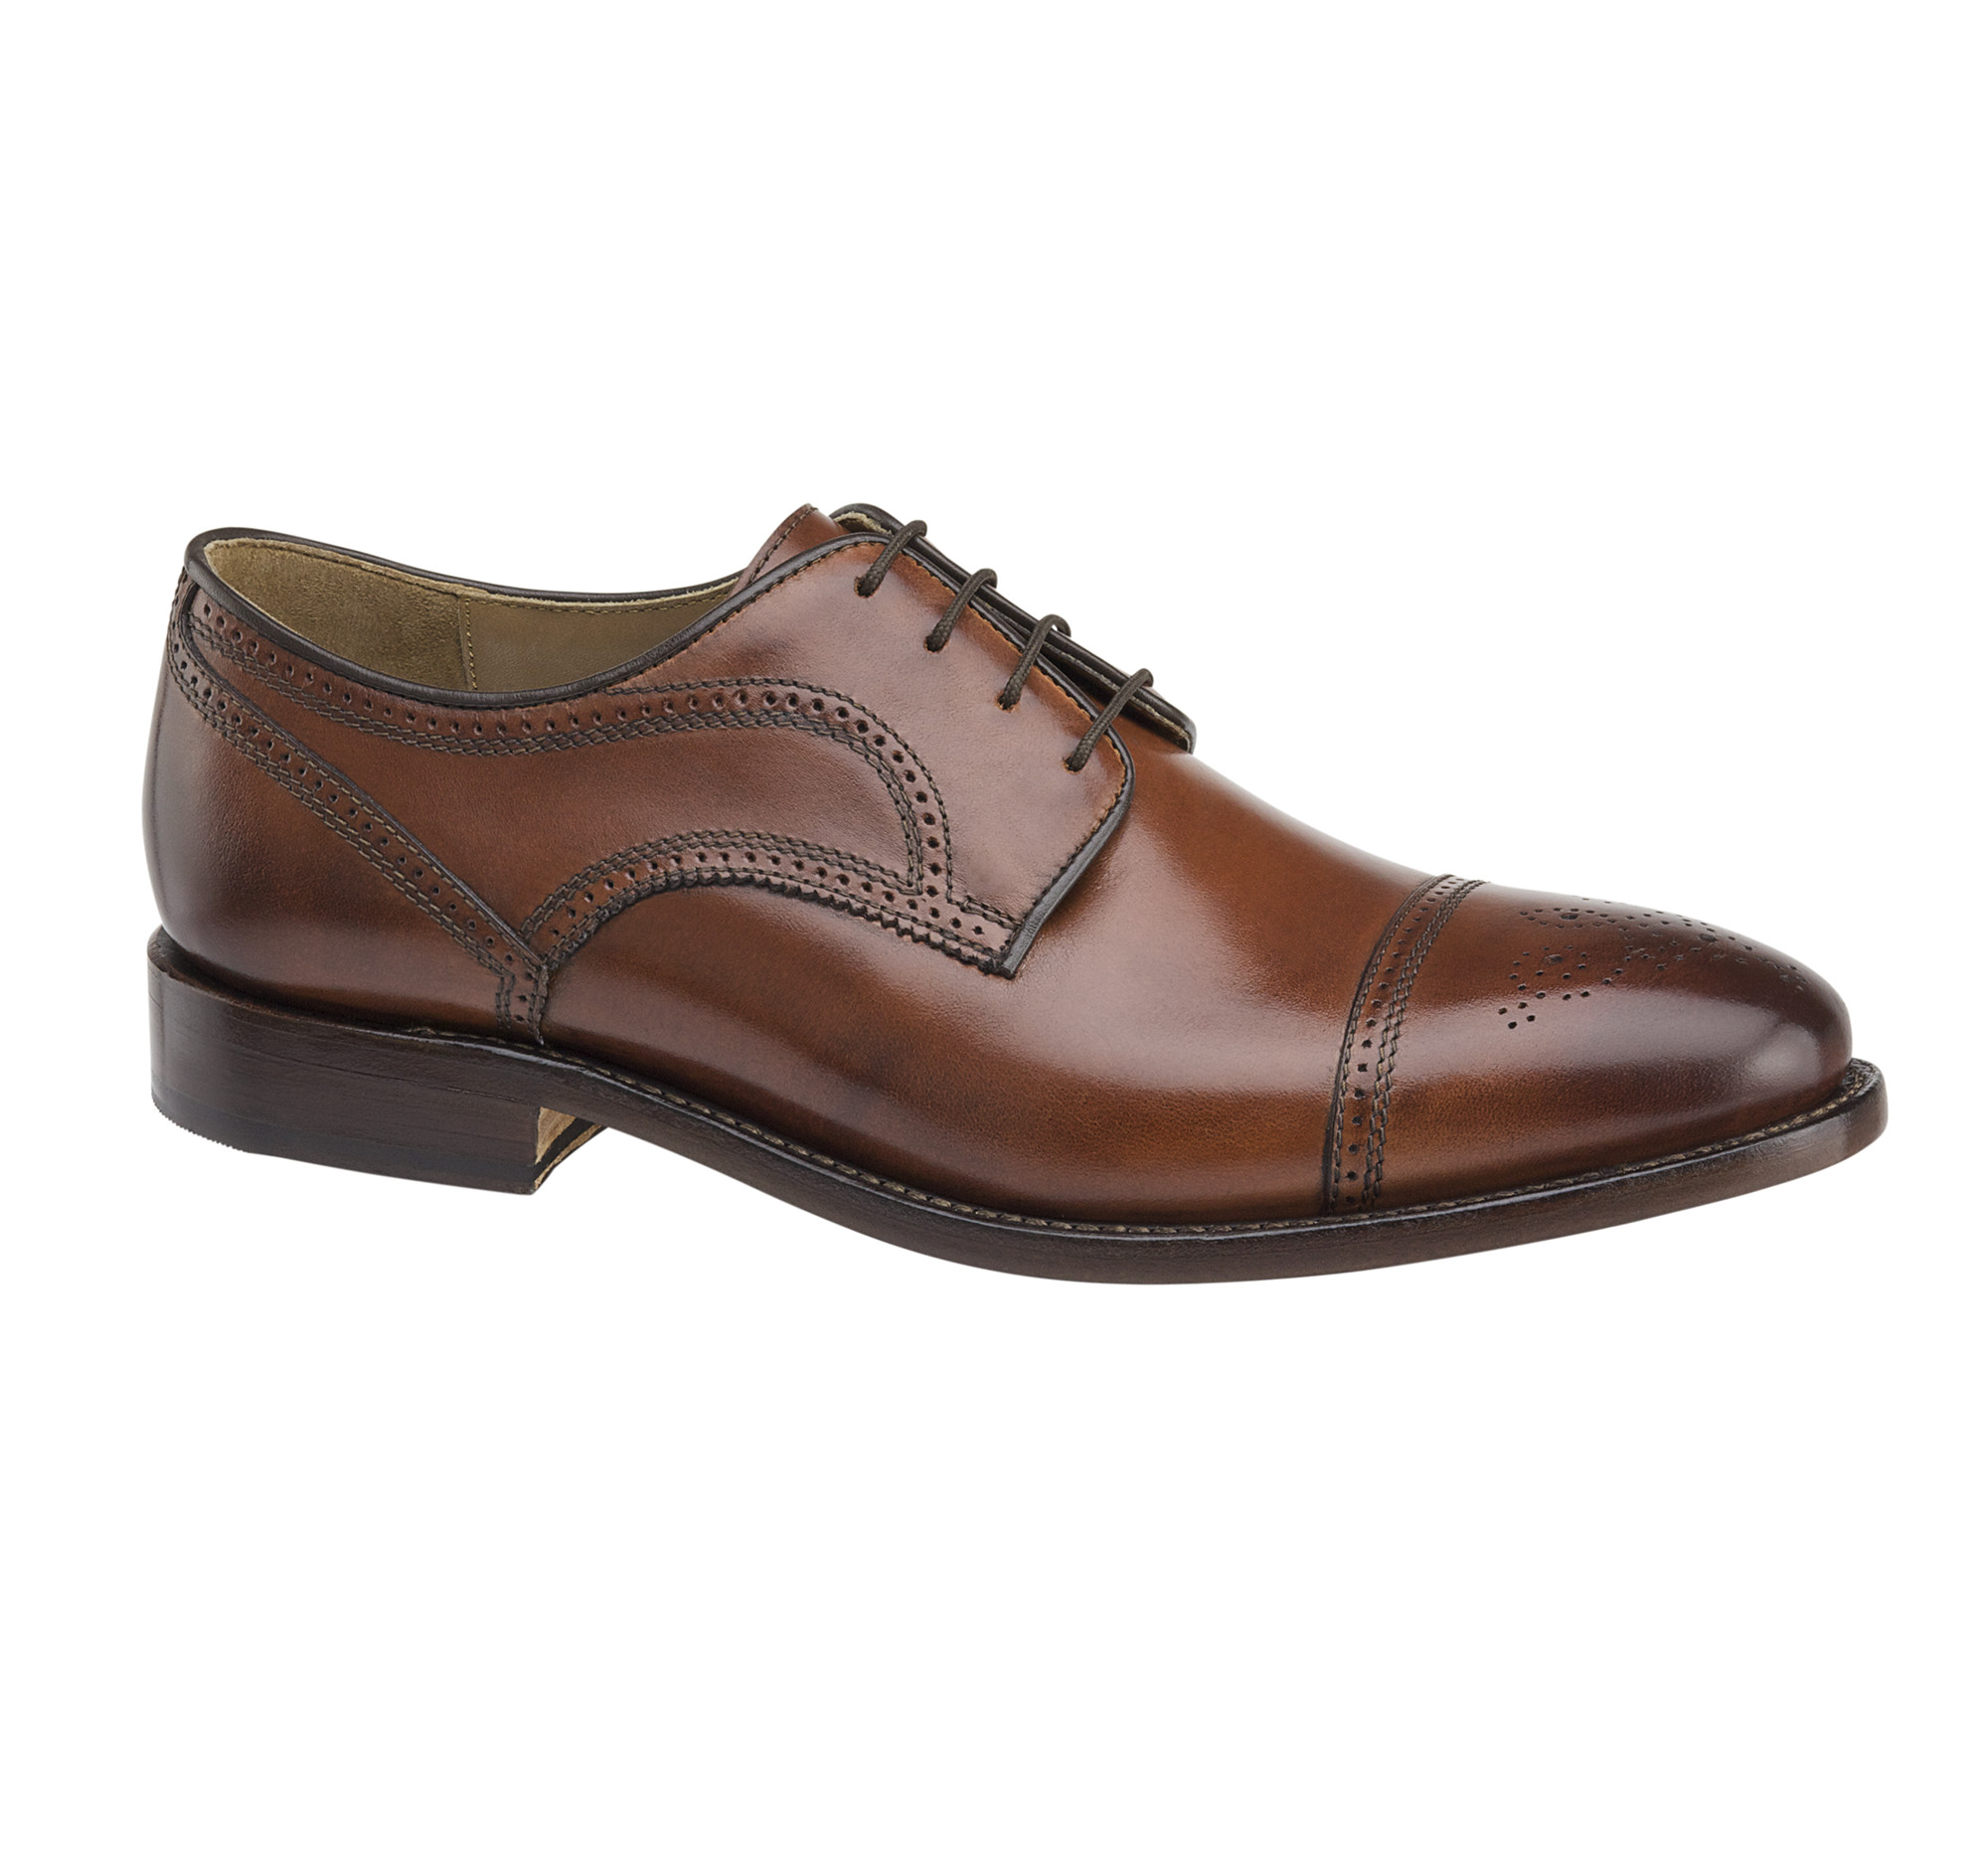 johnston and murphy cap toe shoes